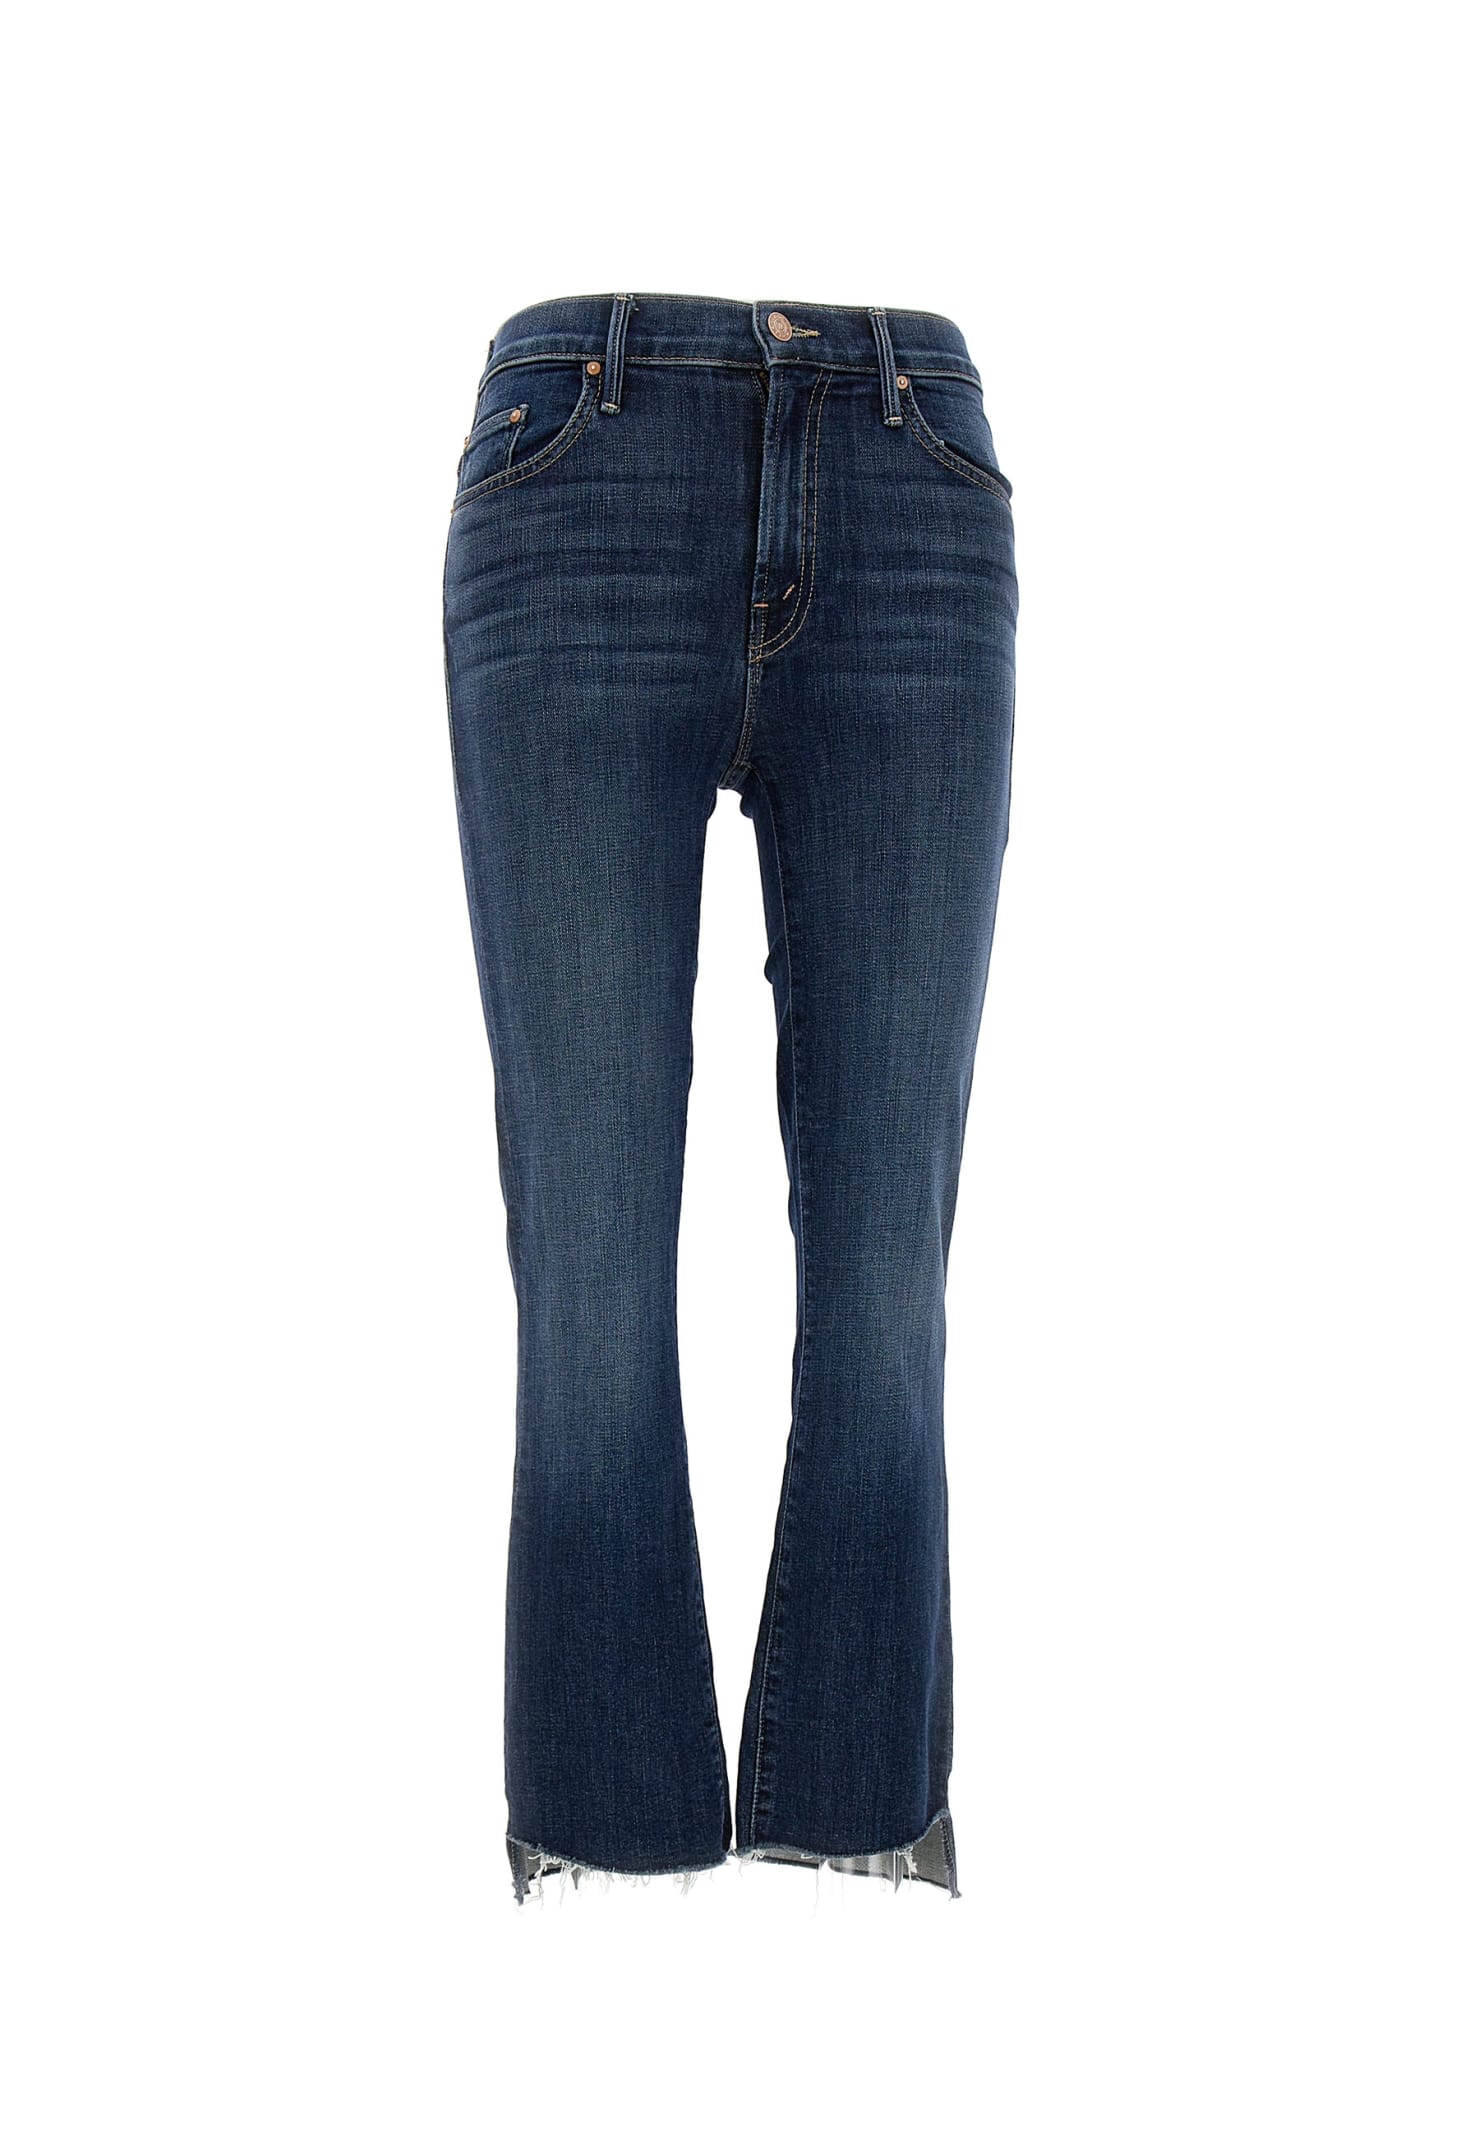 MOTHER MOTHER THE INSIDER CROP STEP FRAY JEANS